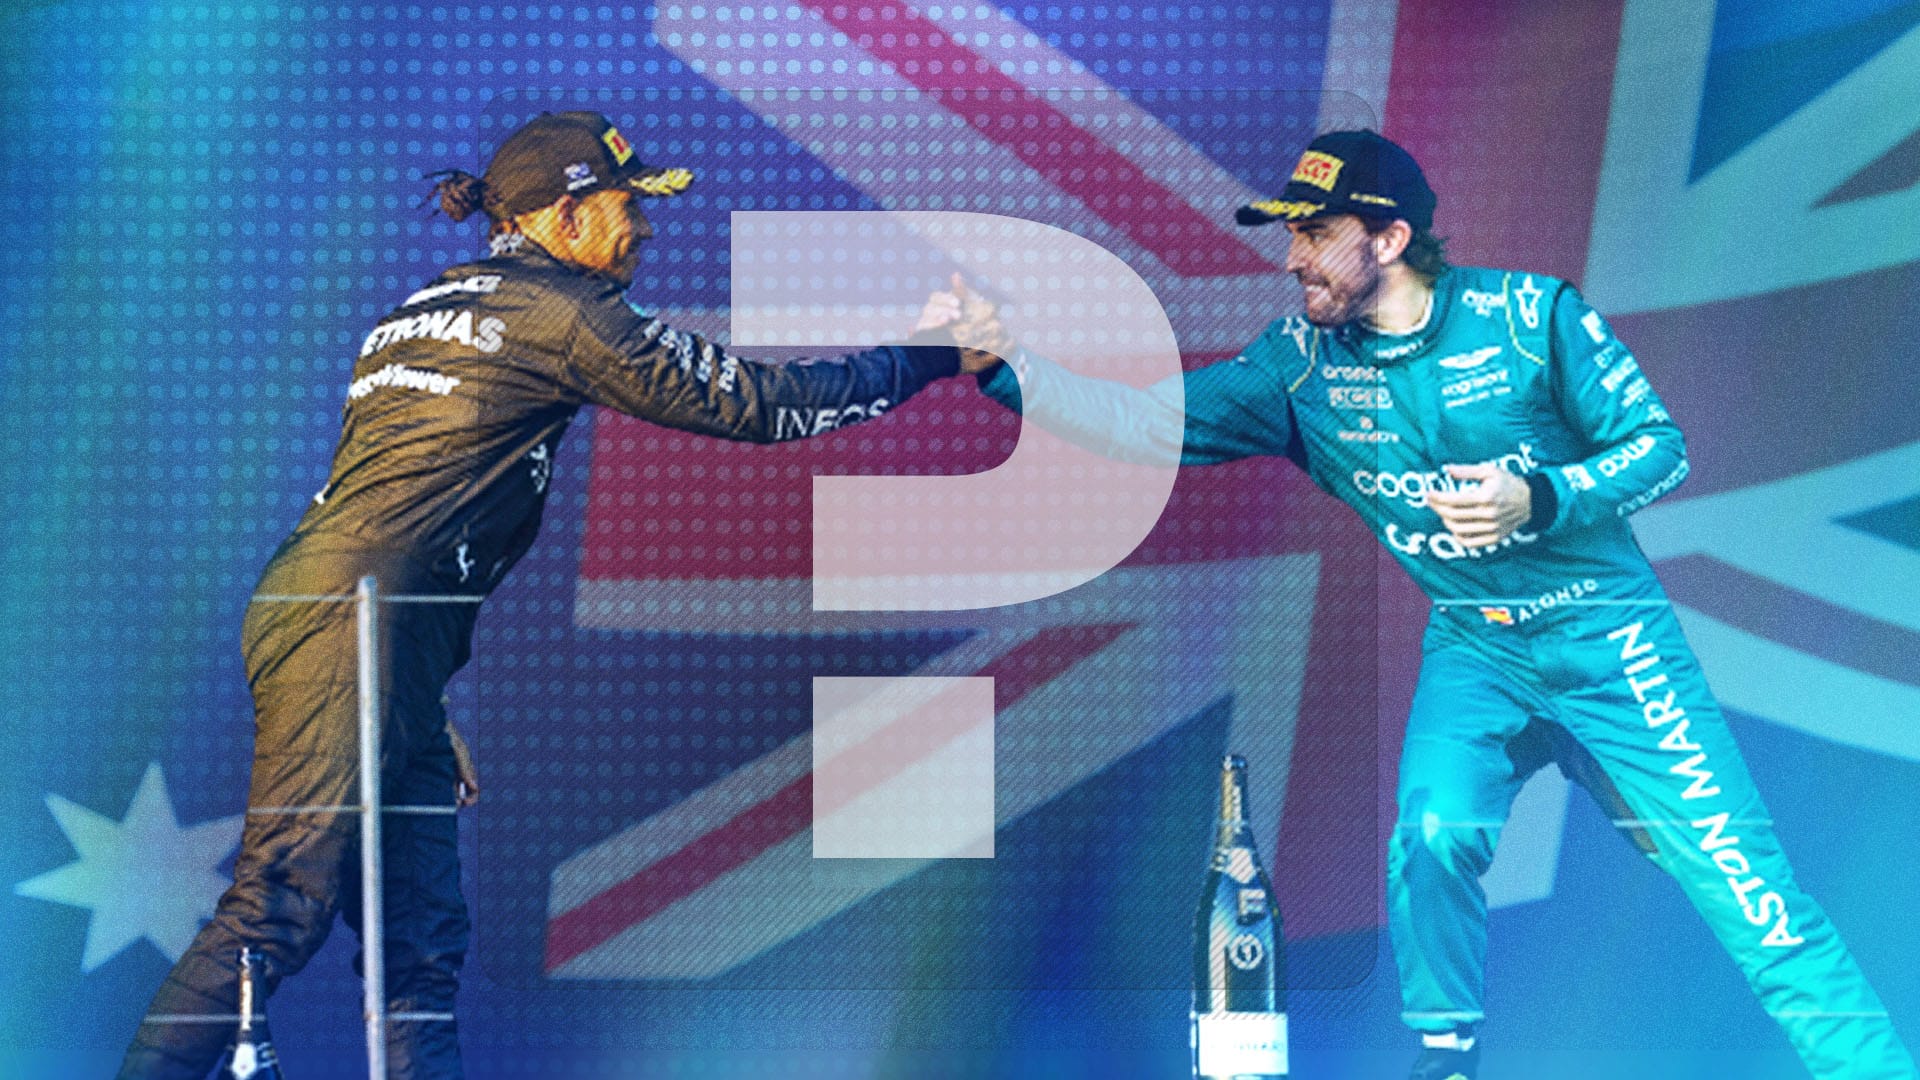 THIS WEEK IN F1 10 quiz questions on the latest F1 news after the 2023 Australian Grand Prix Formula 1®